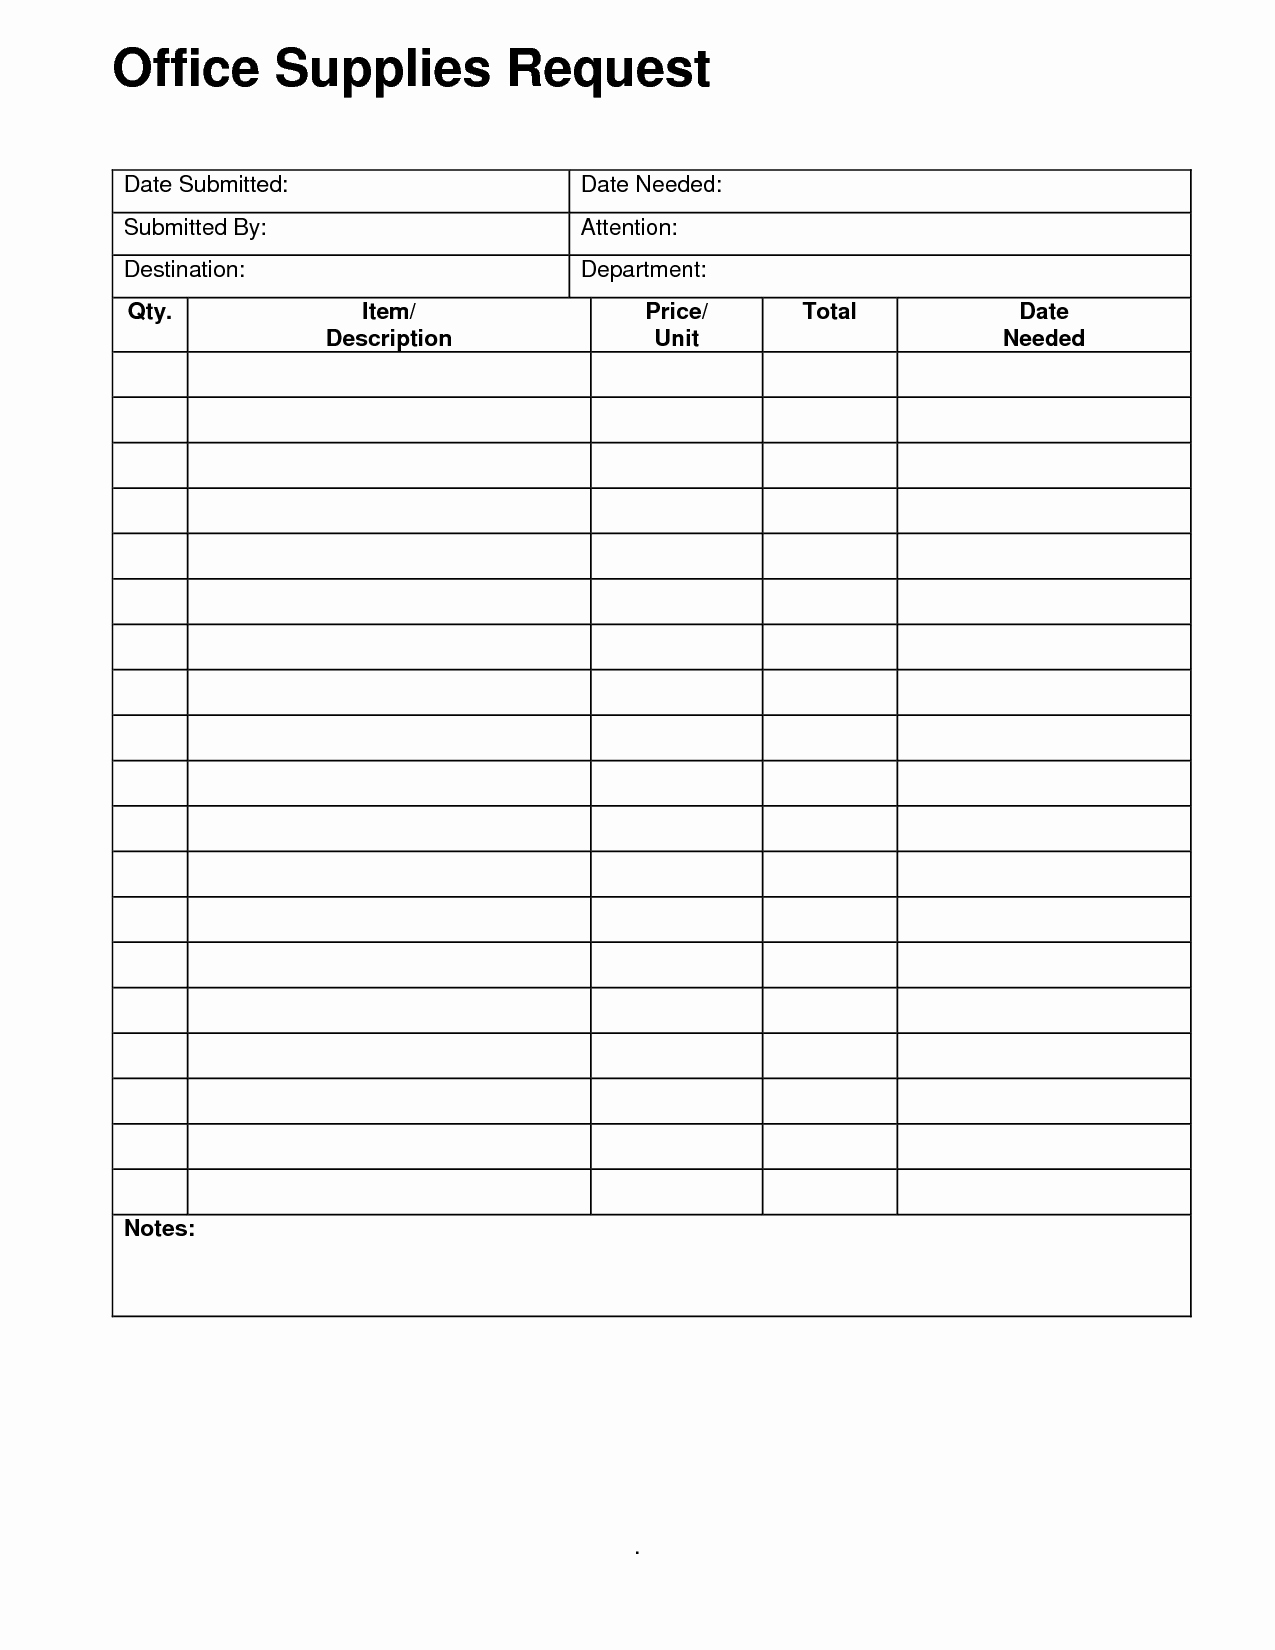 Office Supplies Inventory Template Fresh Fice Supply Checklist Templates for Your Business Violeet